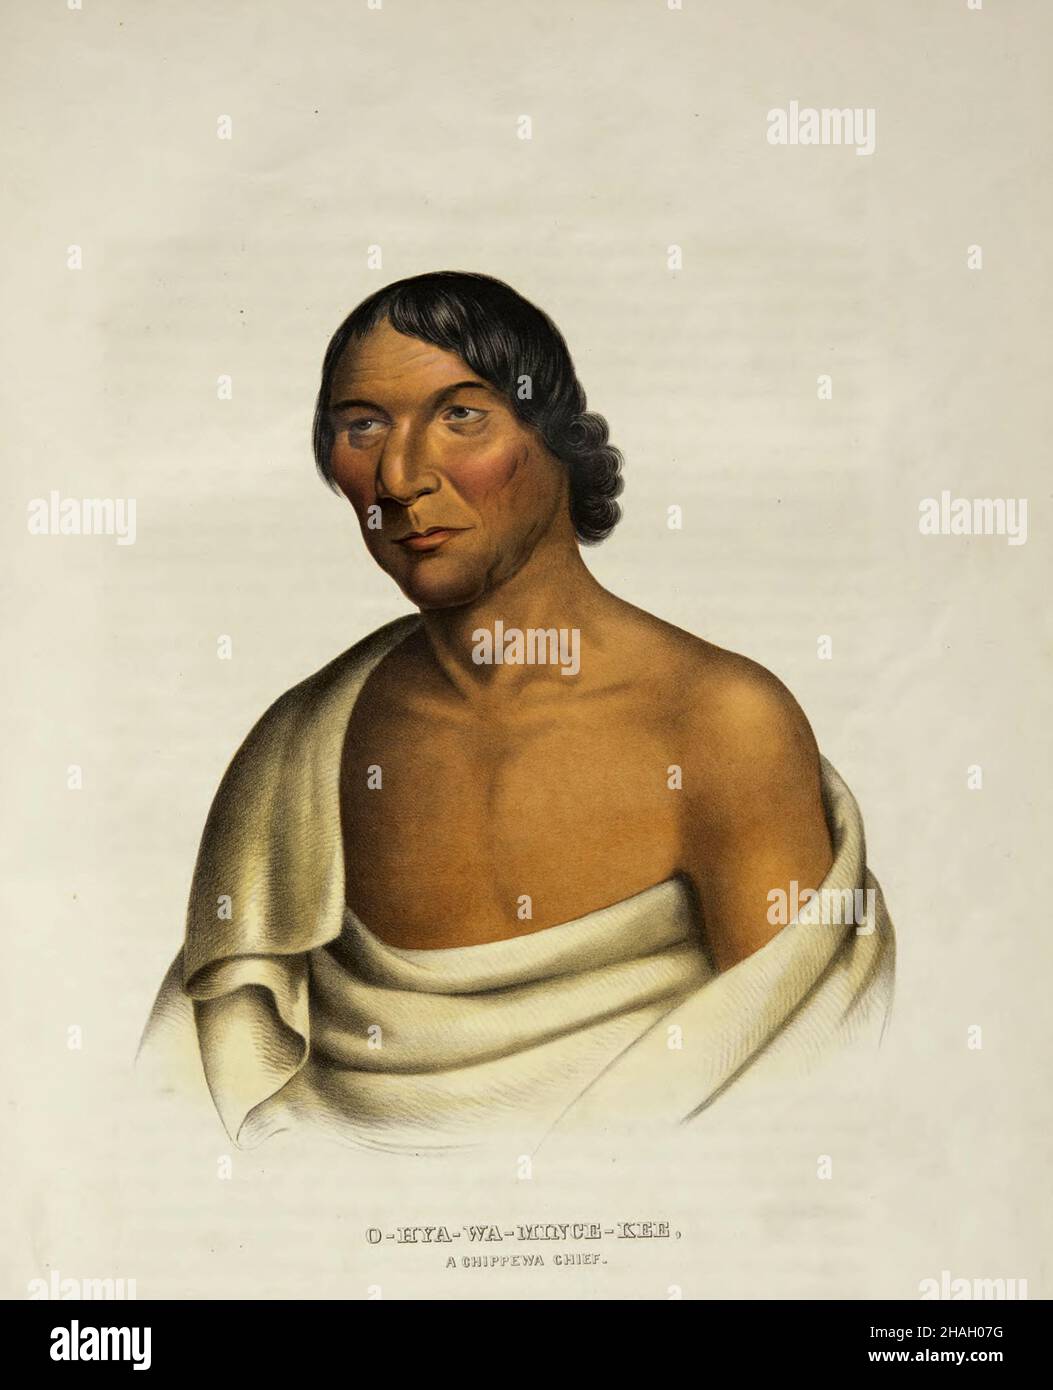 O‑HYA-WA-MINCE-KEE, A CHIPPEWA CHIEF from the book ' History of the Indian Tribes of North America with biographical sketches and anecdotes of the principal chiefs. ' Volume 3 of 3 by Thomas Loraine,McKenney, and James Hall Esq. Published in 1844 Painted by Charles Bird King Stock Photo